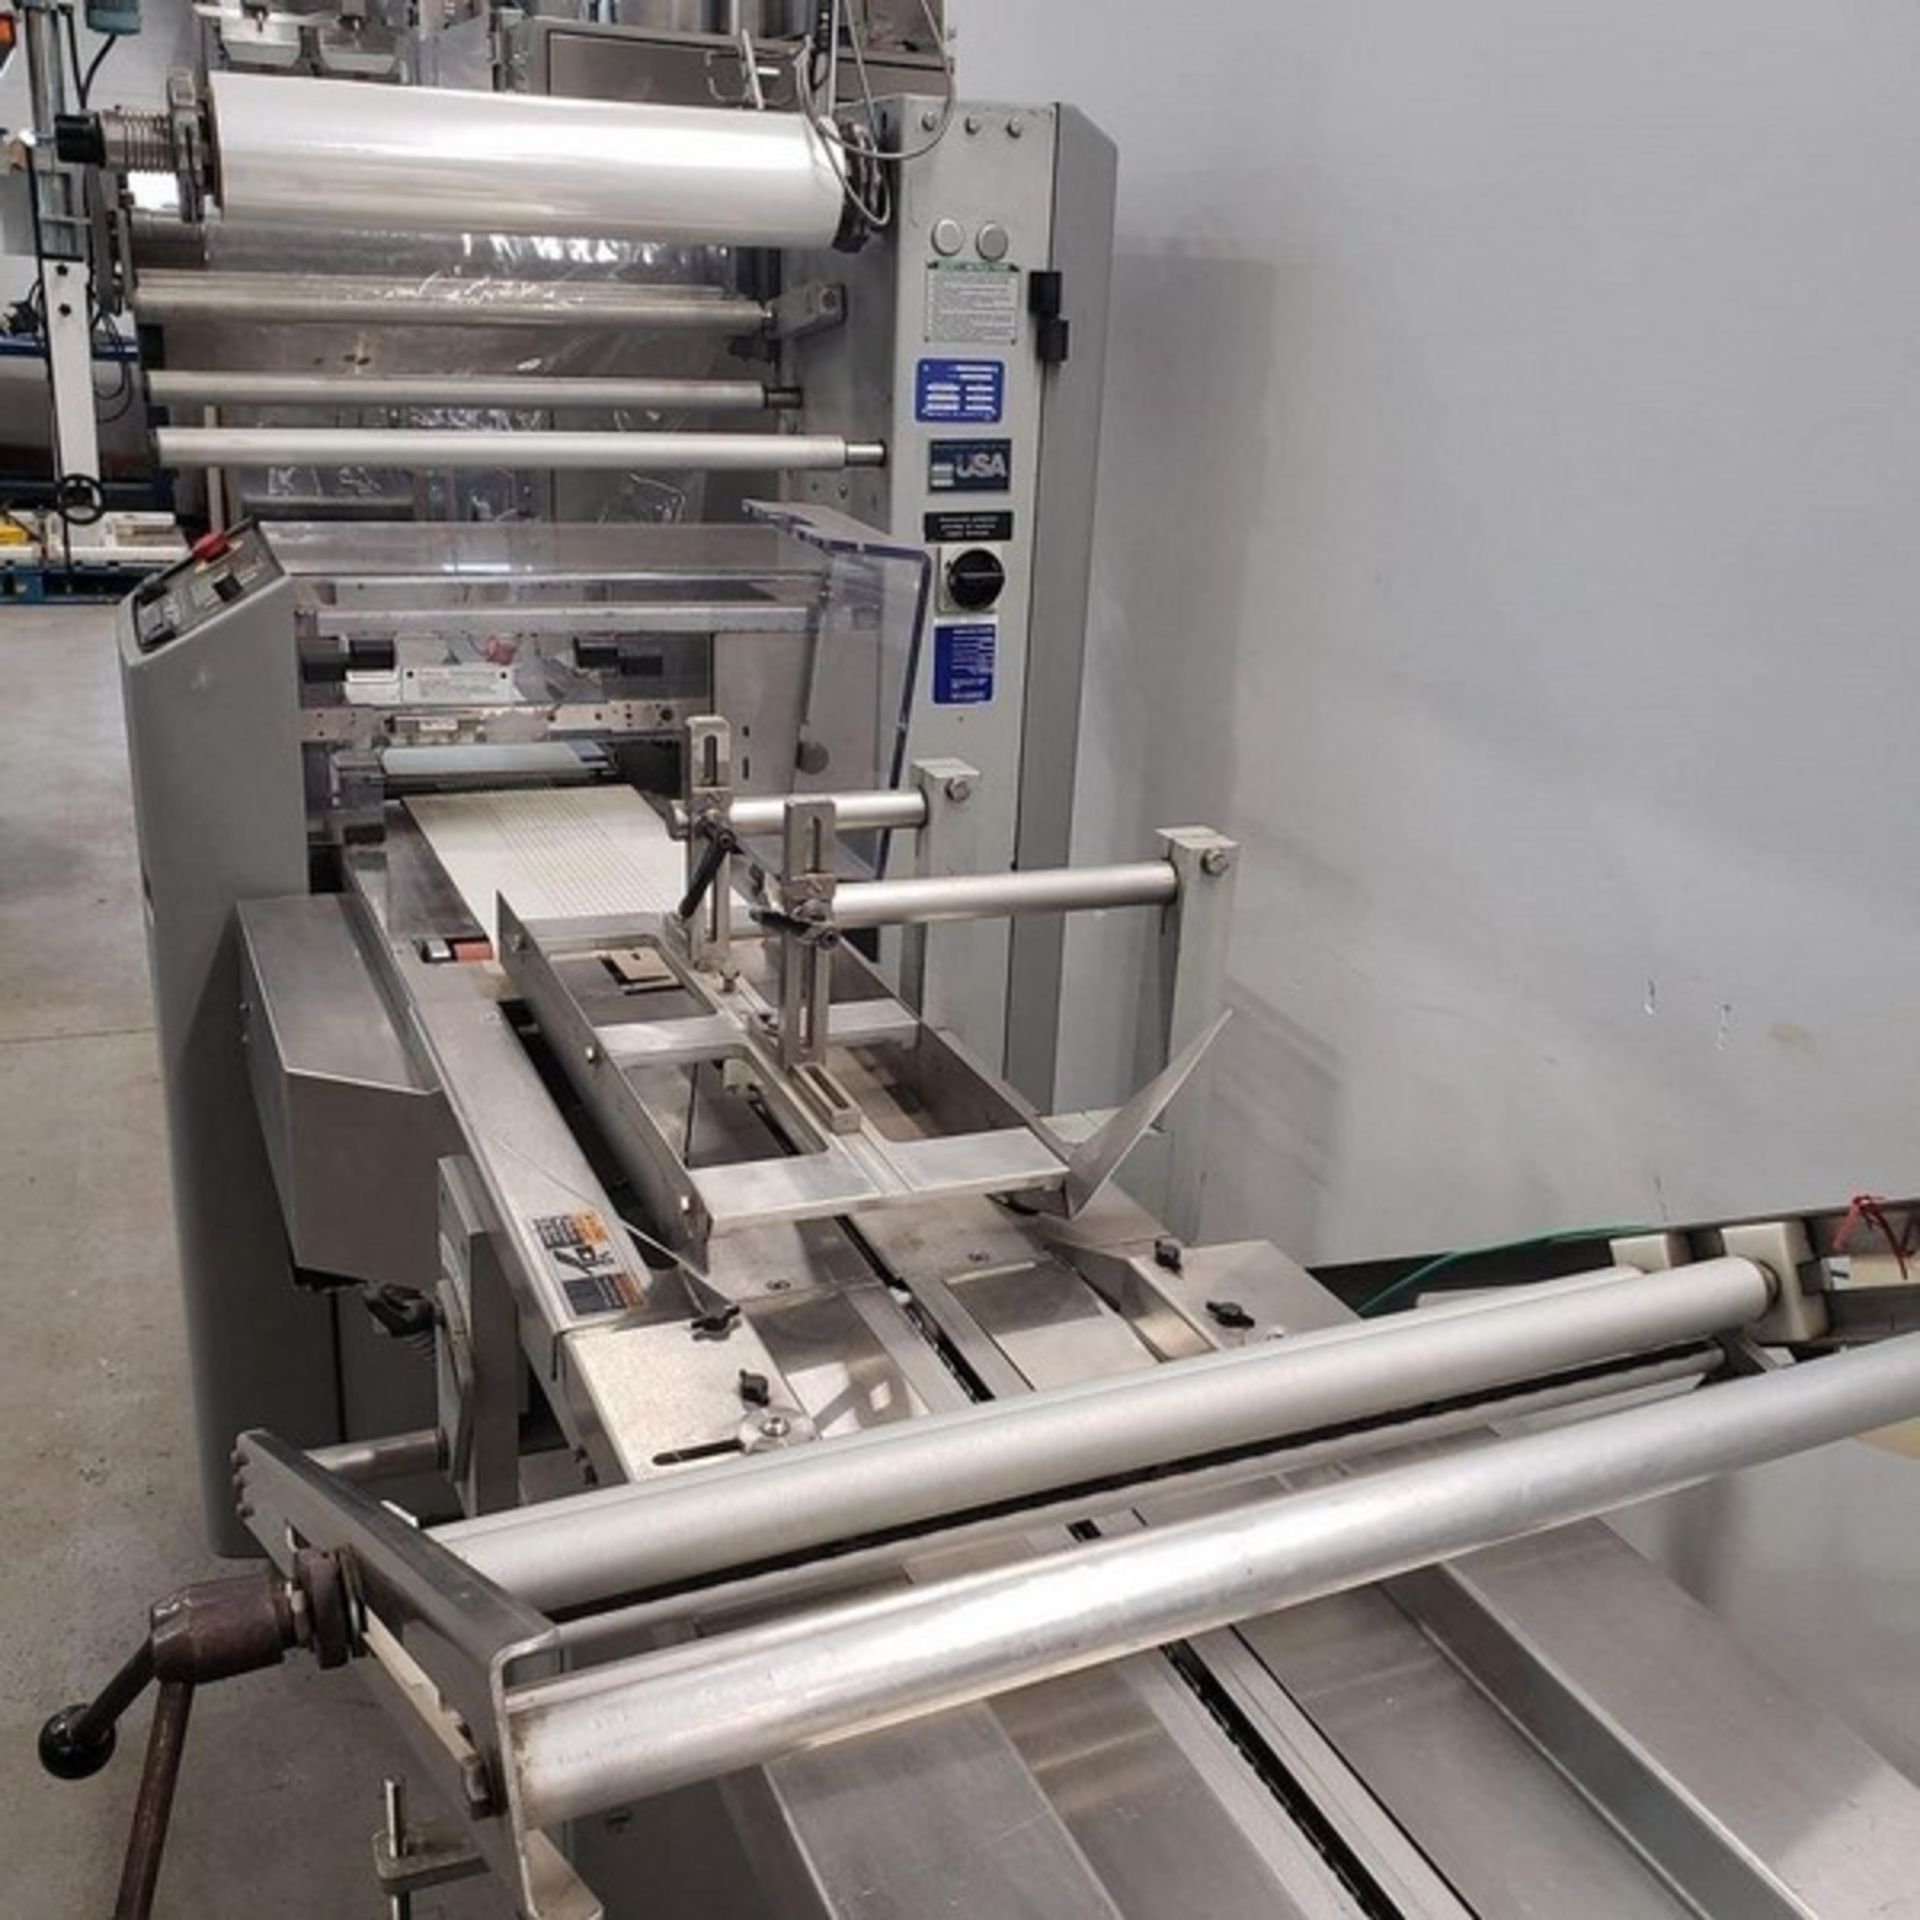 Doboy Model Stratus Horizontal Flow Wrapper, food and cosmetical grade, up to 50 packages per minute - Image 4 of 7